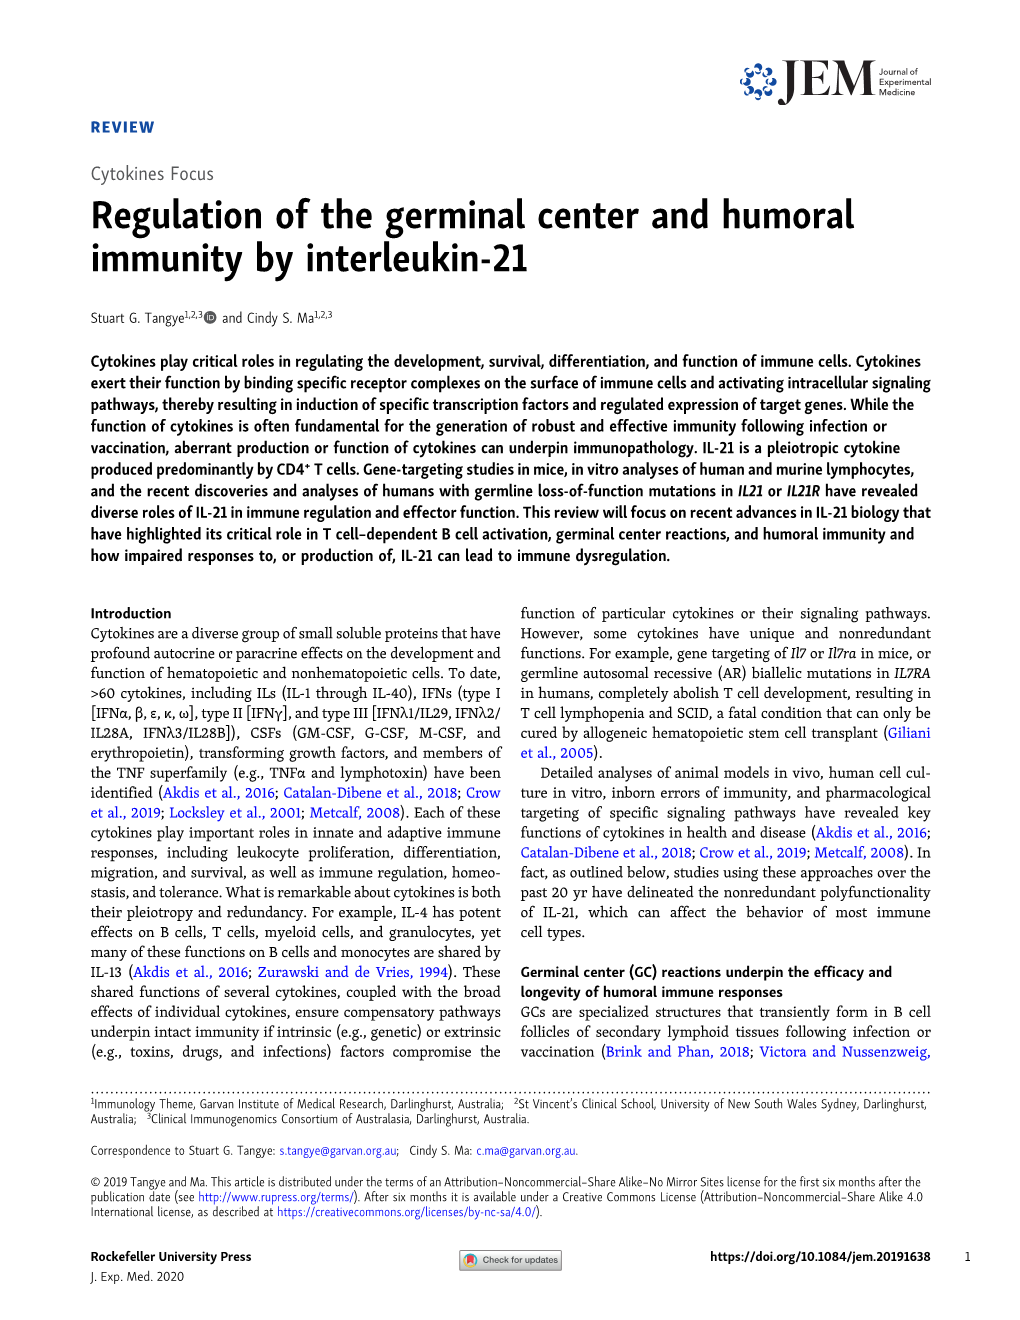 Regulation of the Germinal Center and Humoral Immunity by Interleukin-21